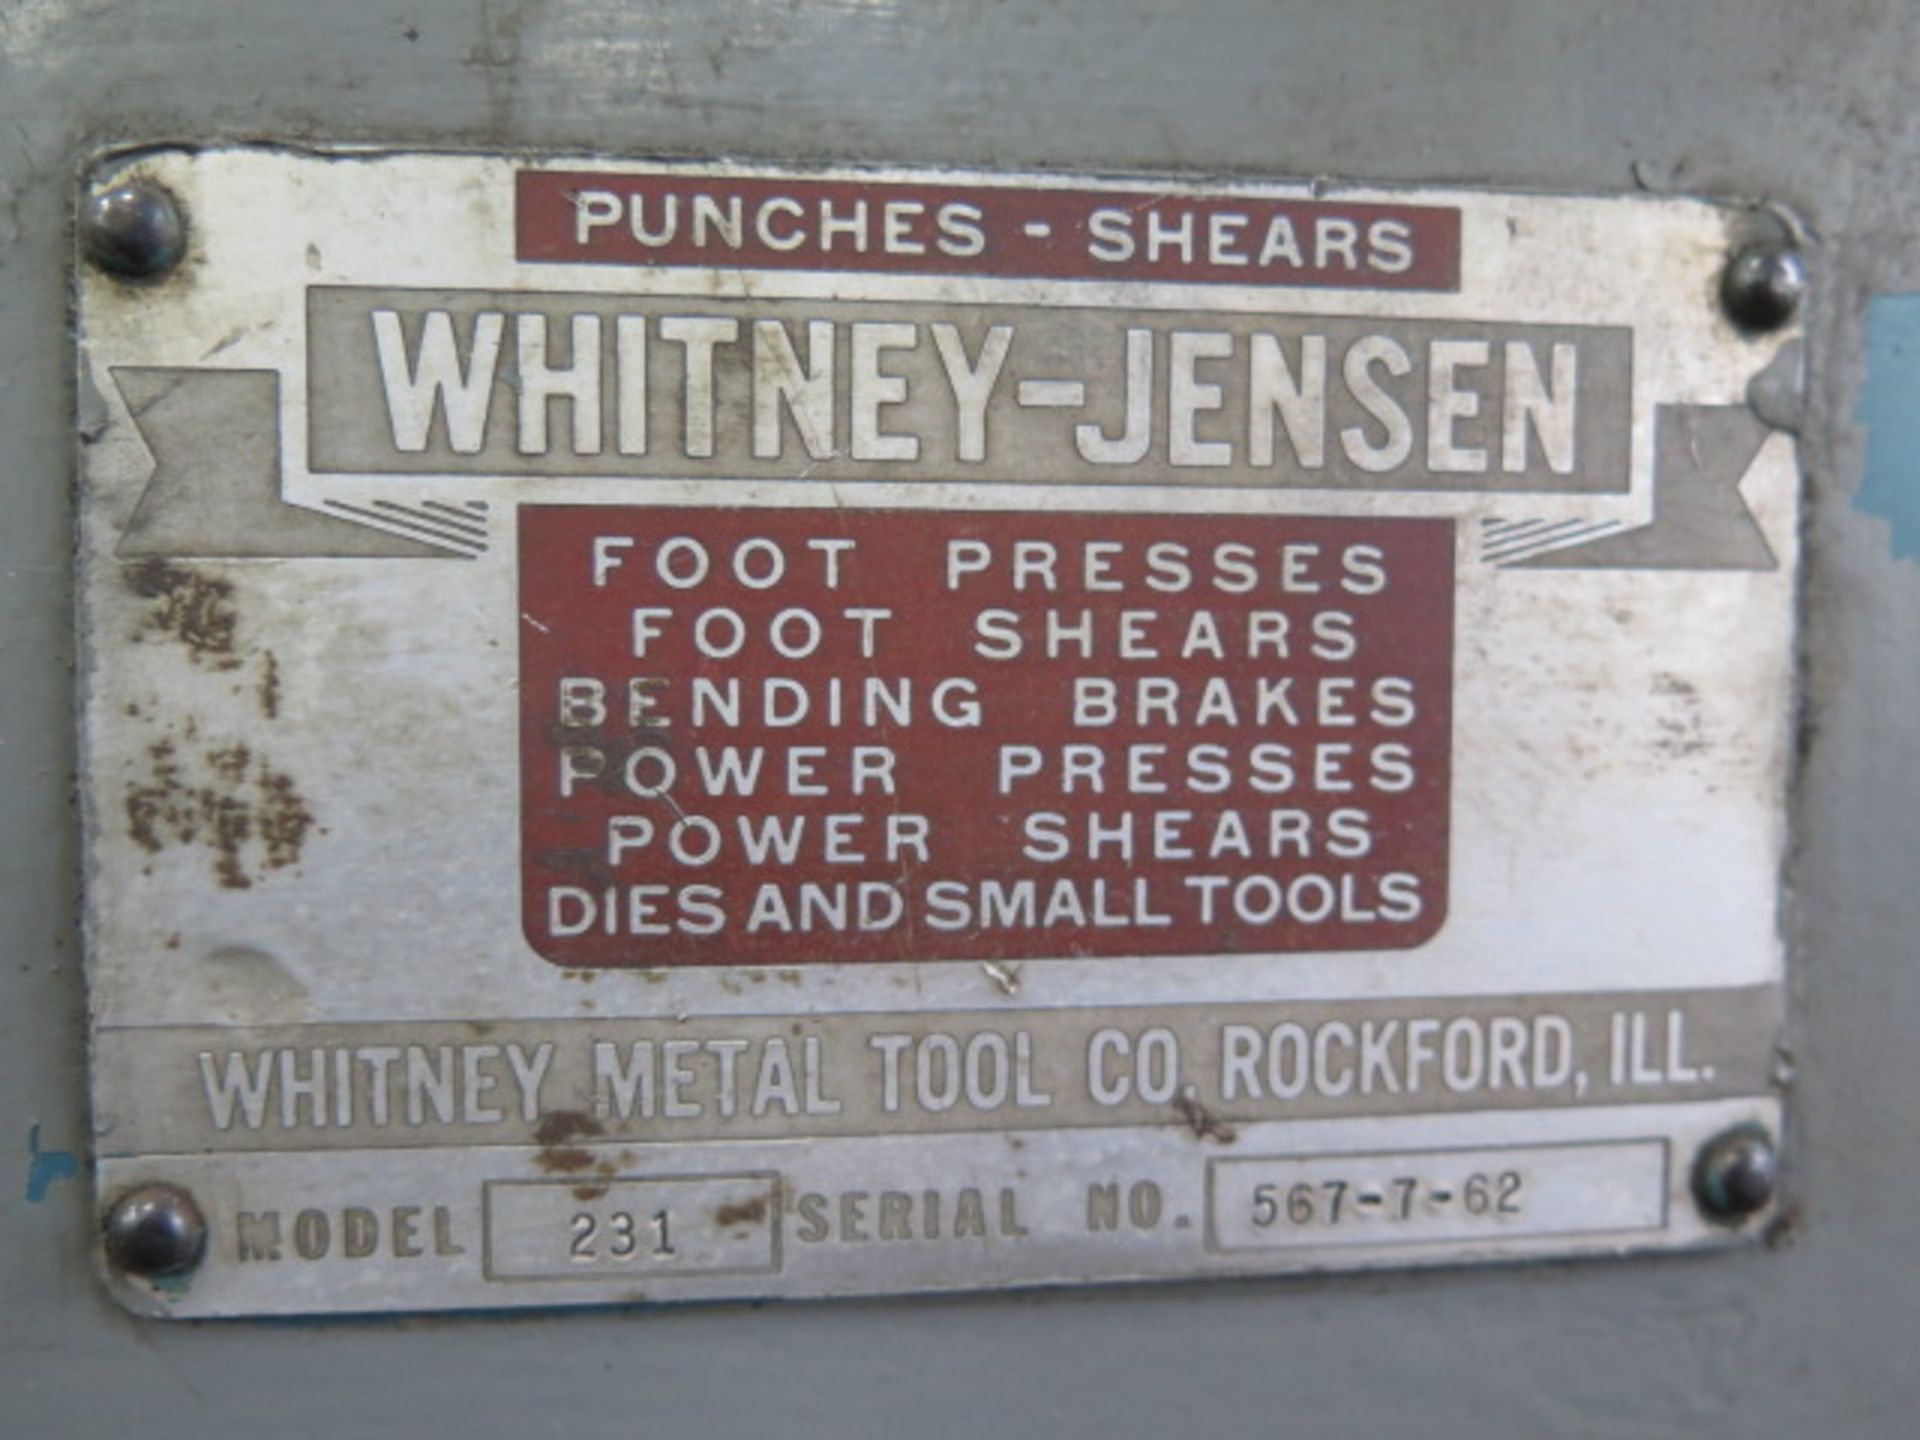 Whitney-Jensen mdl. 231 Punch Press s/n 367-7-62 (FOR PARTS ONLY) (SOLD AS-IS - NO WARRANTY - Image 6 of 6